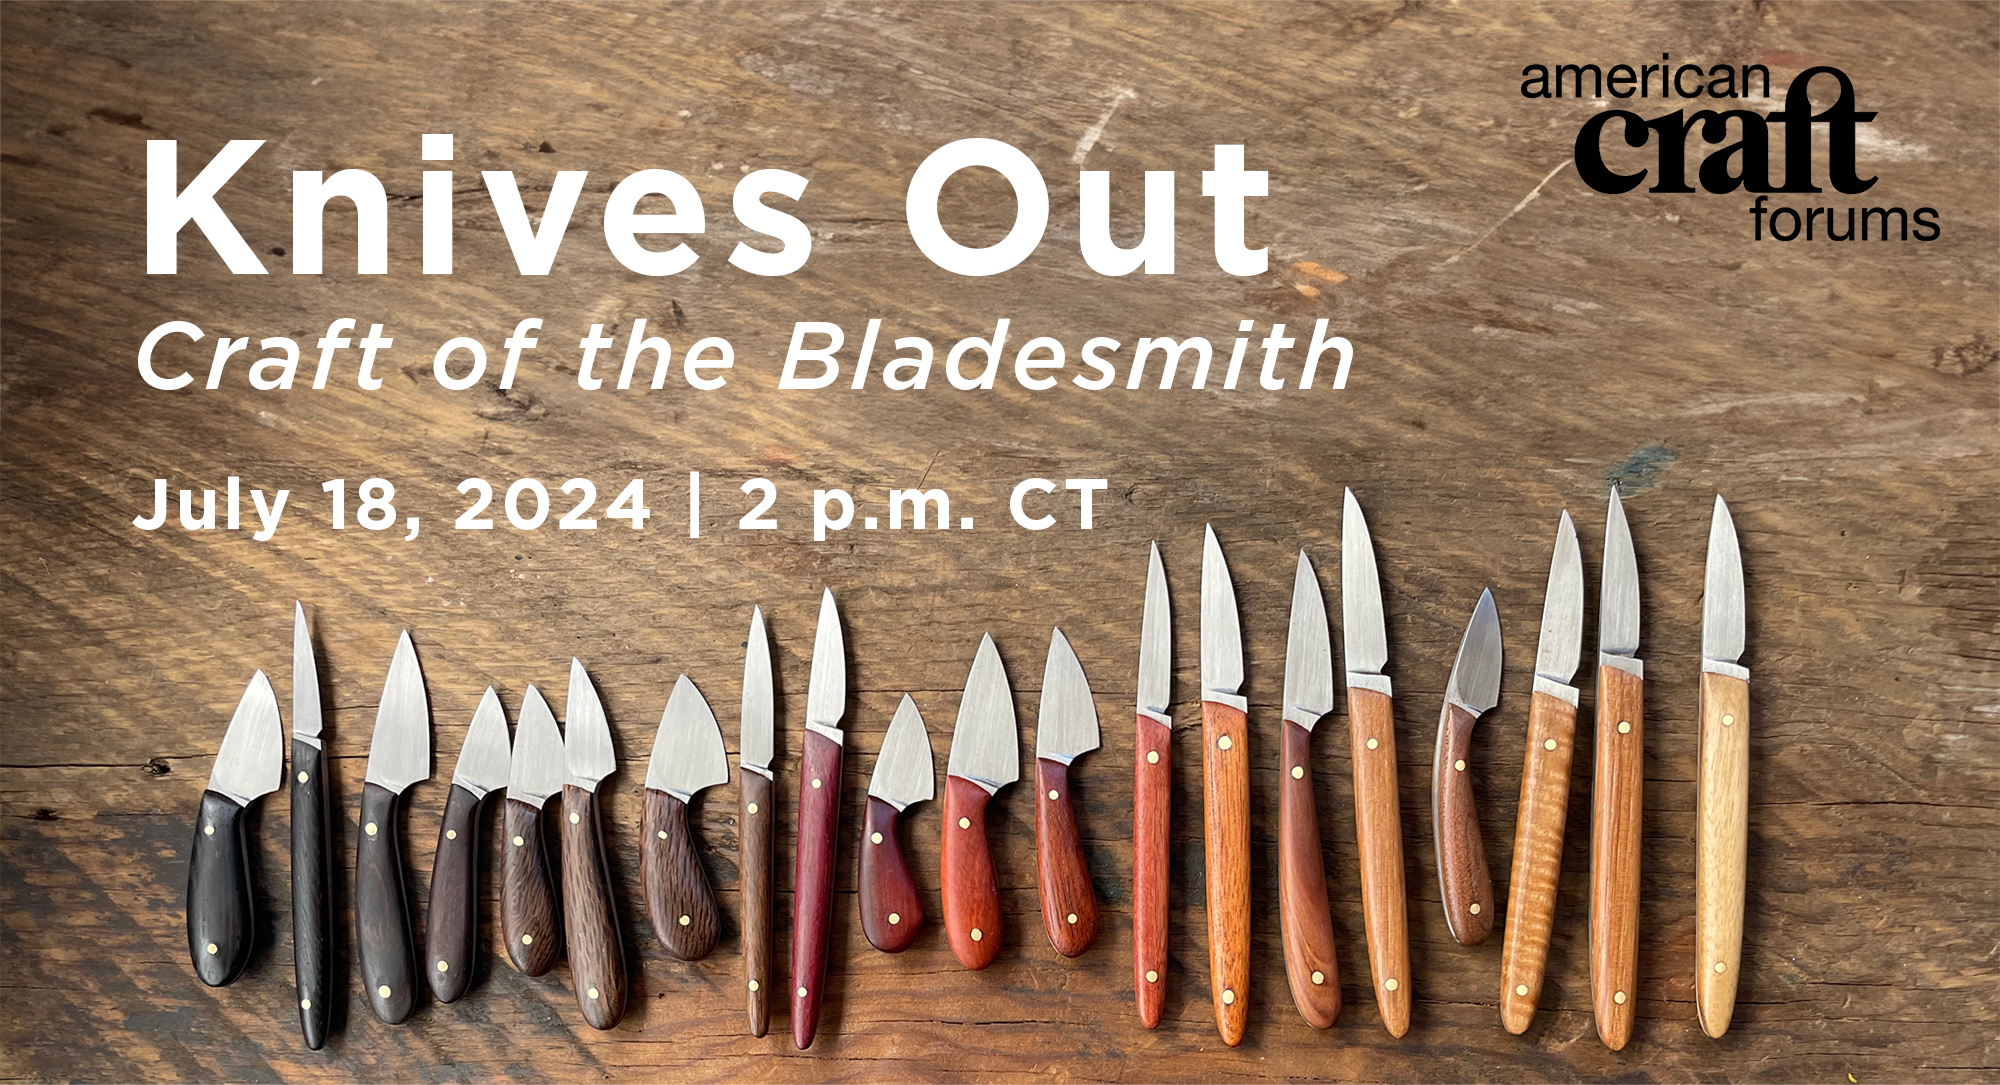 American Craft Summer Forum graphic for Knives Out: Craft of the Bladesmith